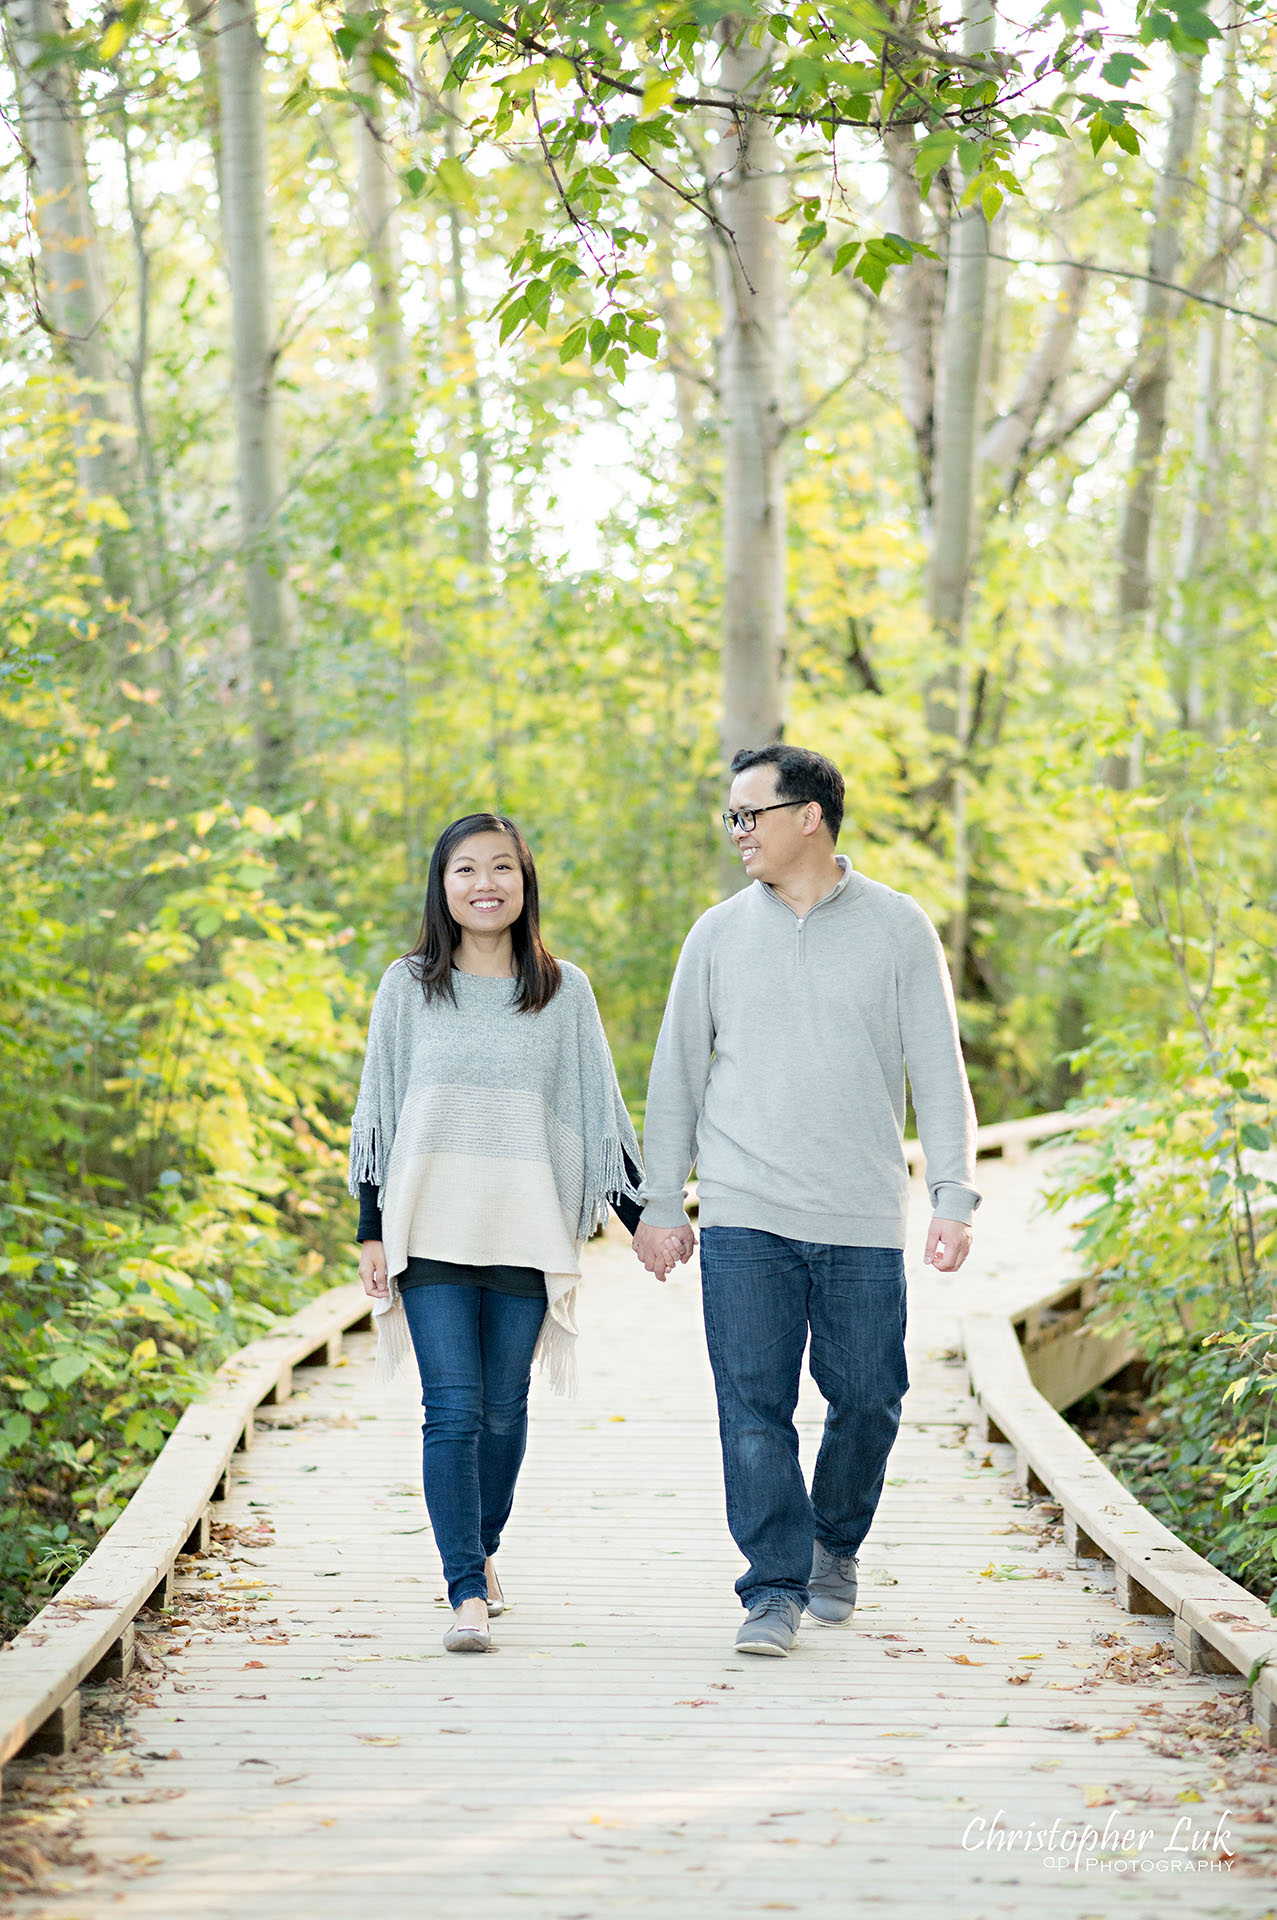 Christopher Luk Markham Family Photographer Autumn Leaves Fall Season Candid Photojournalistic Natural Bright Timeless Elegant Boardwalk Mother Father Husband Wife Holding Hands Walking Together